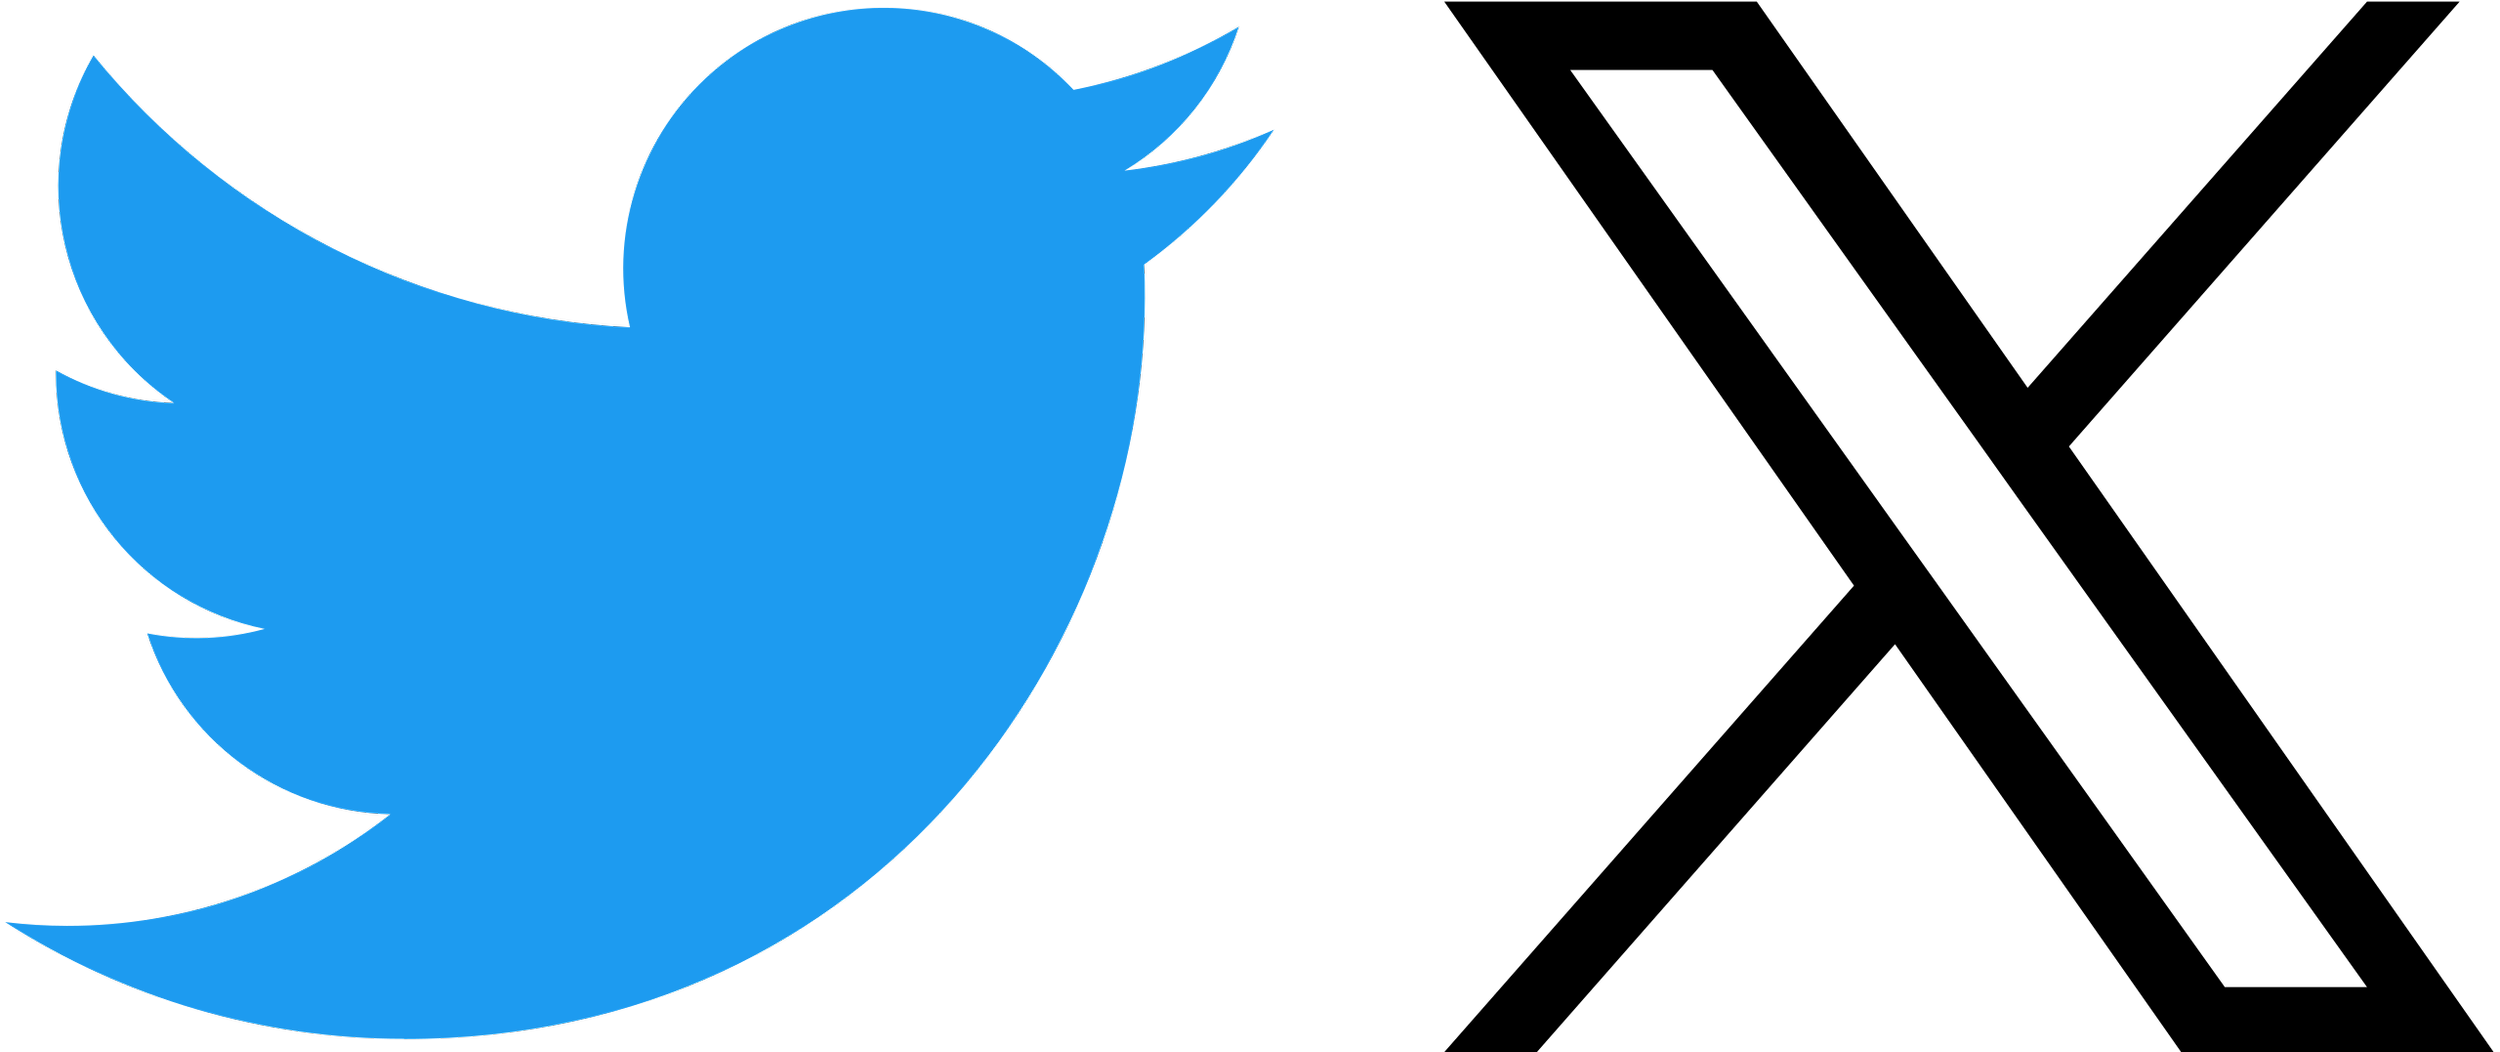 Twitter_and_X_logos.svg.png